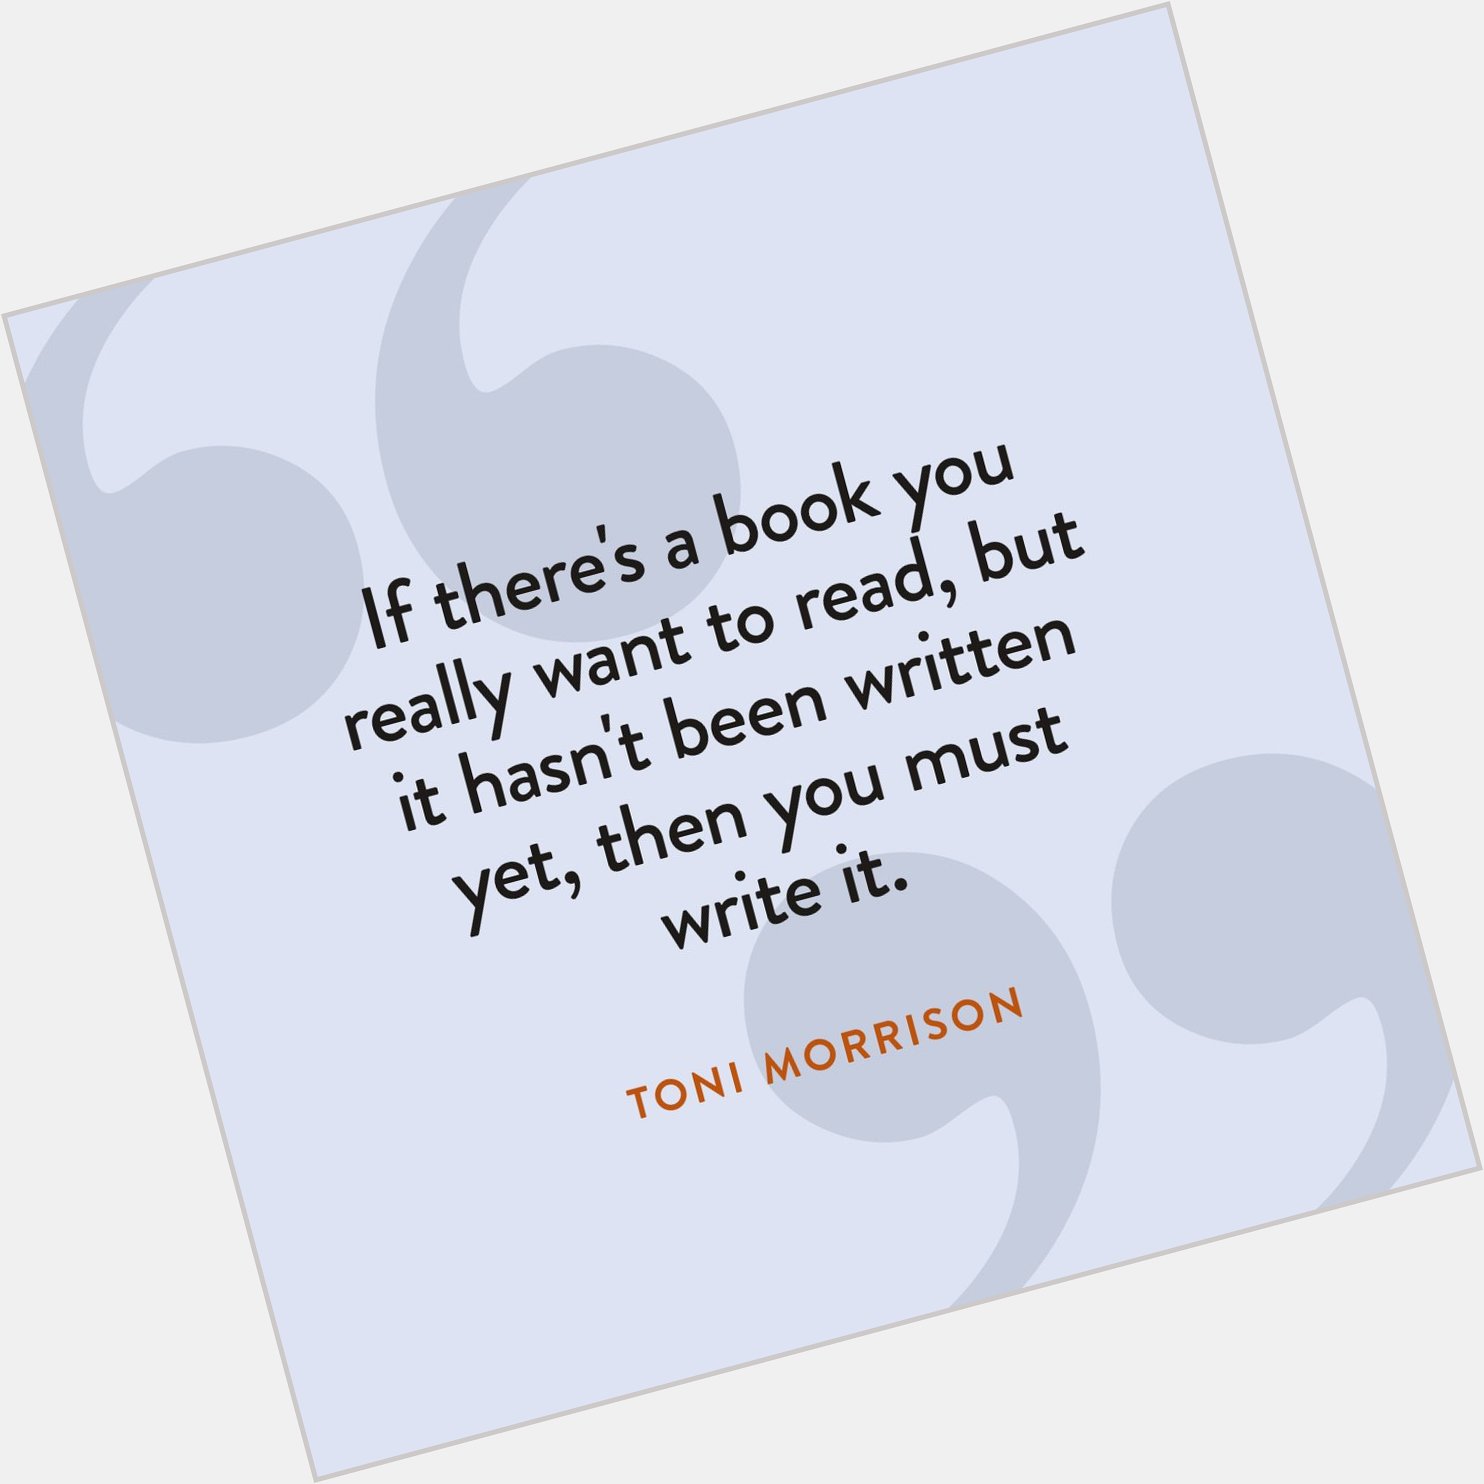 Happy birthday to Toni Morrison, who was born on this day in 1931.  